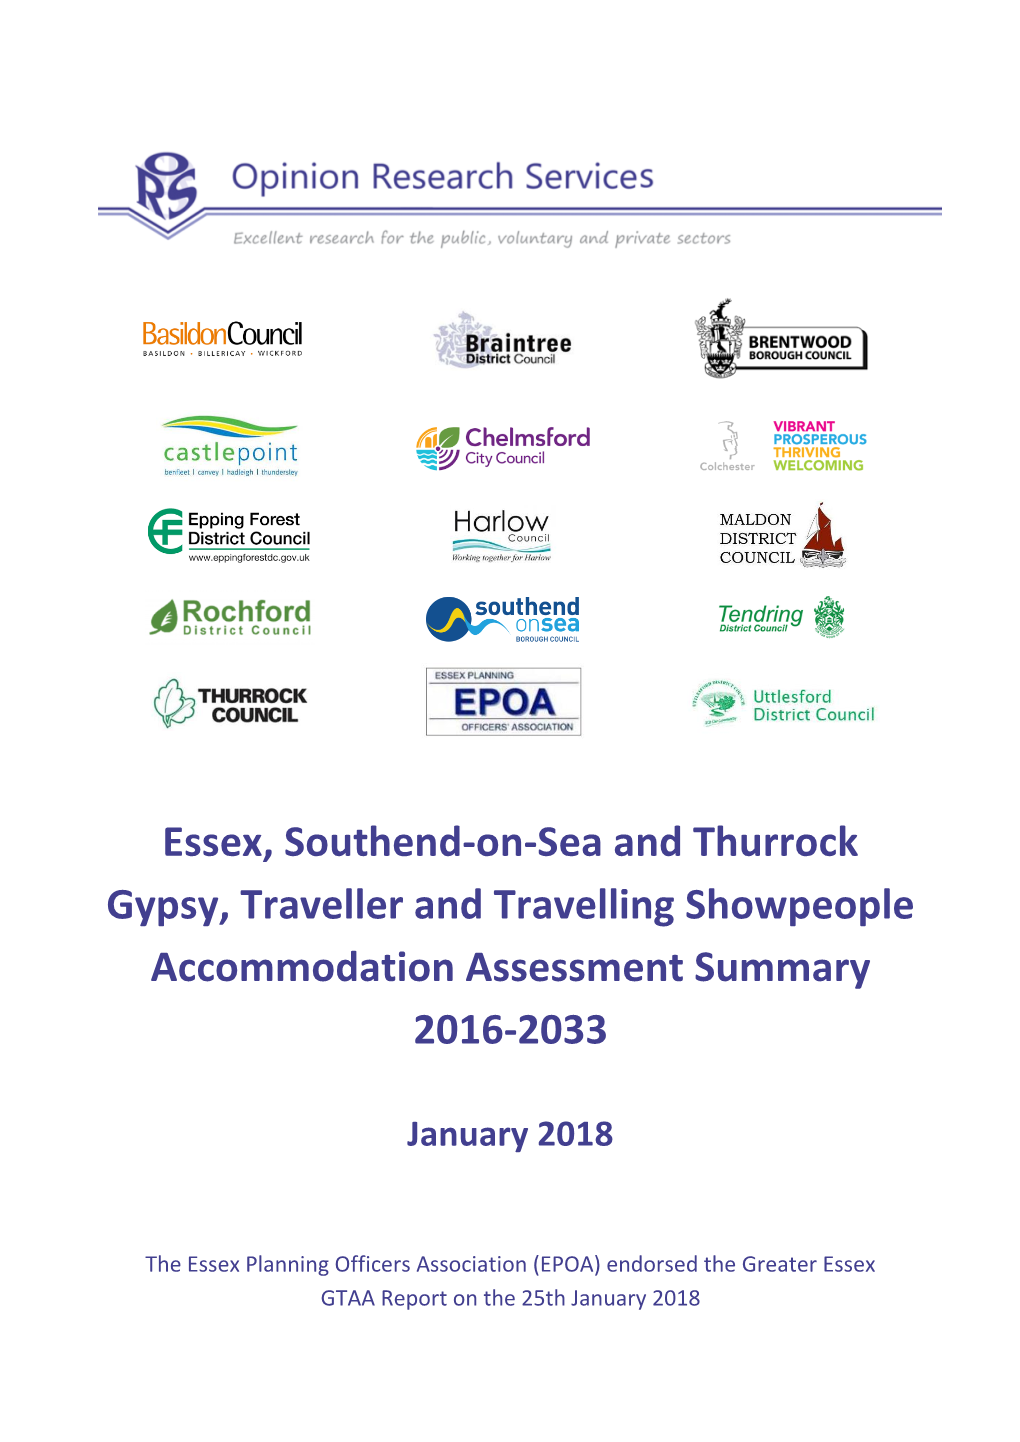 Gypsy, Traveller and Travelling Showpeople Accommodation Assessment Summary 2016-2033